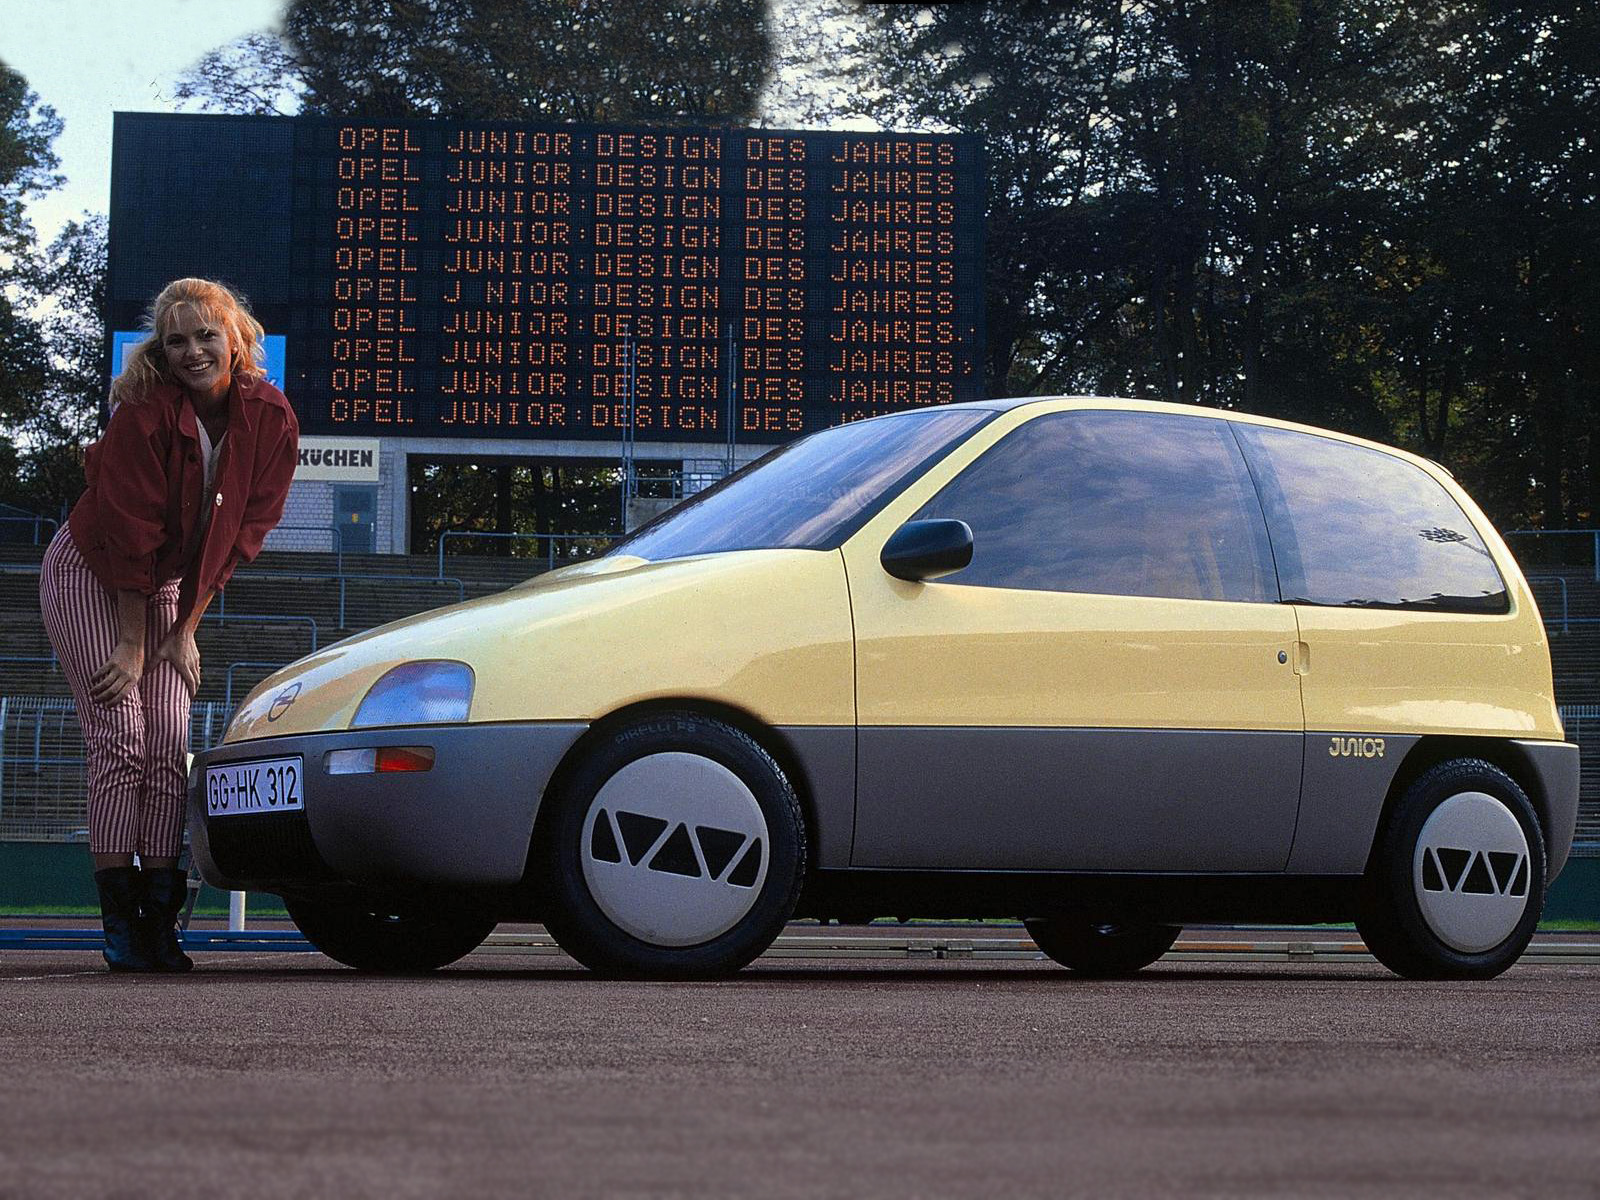 The Opel Junior Was An Amazing Concept Car With An Electric Razor Hidden In Its Clock